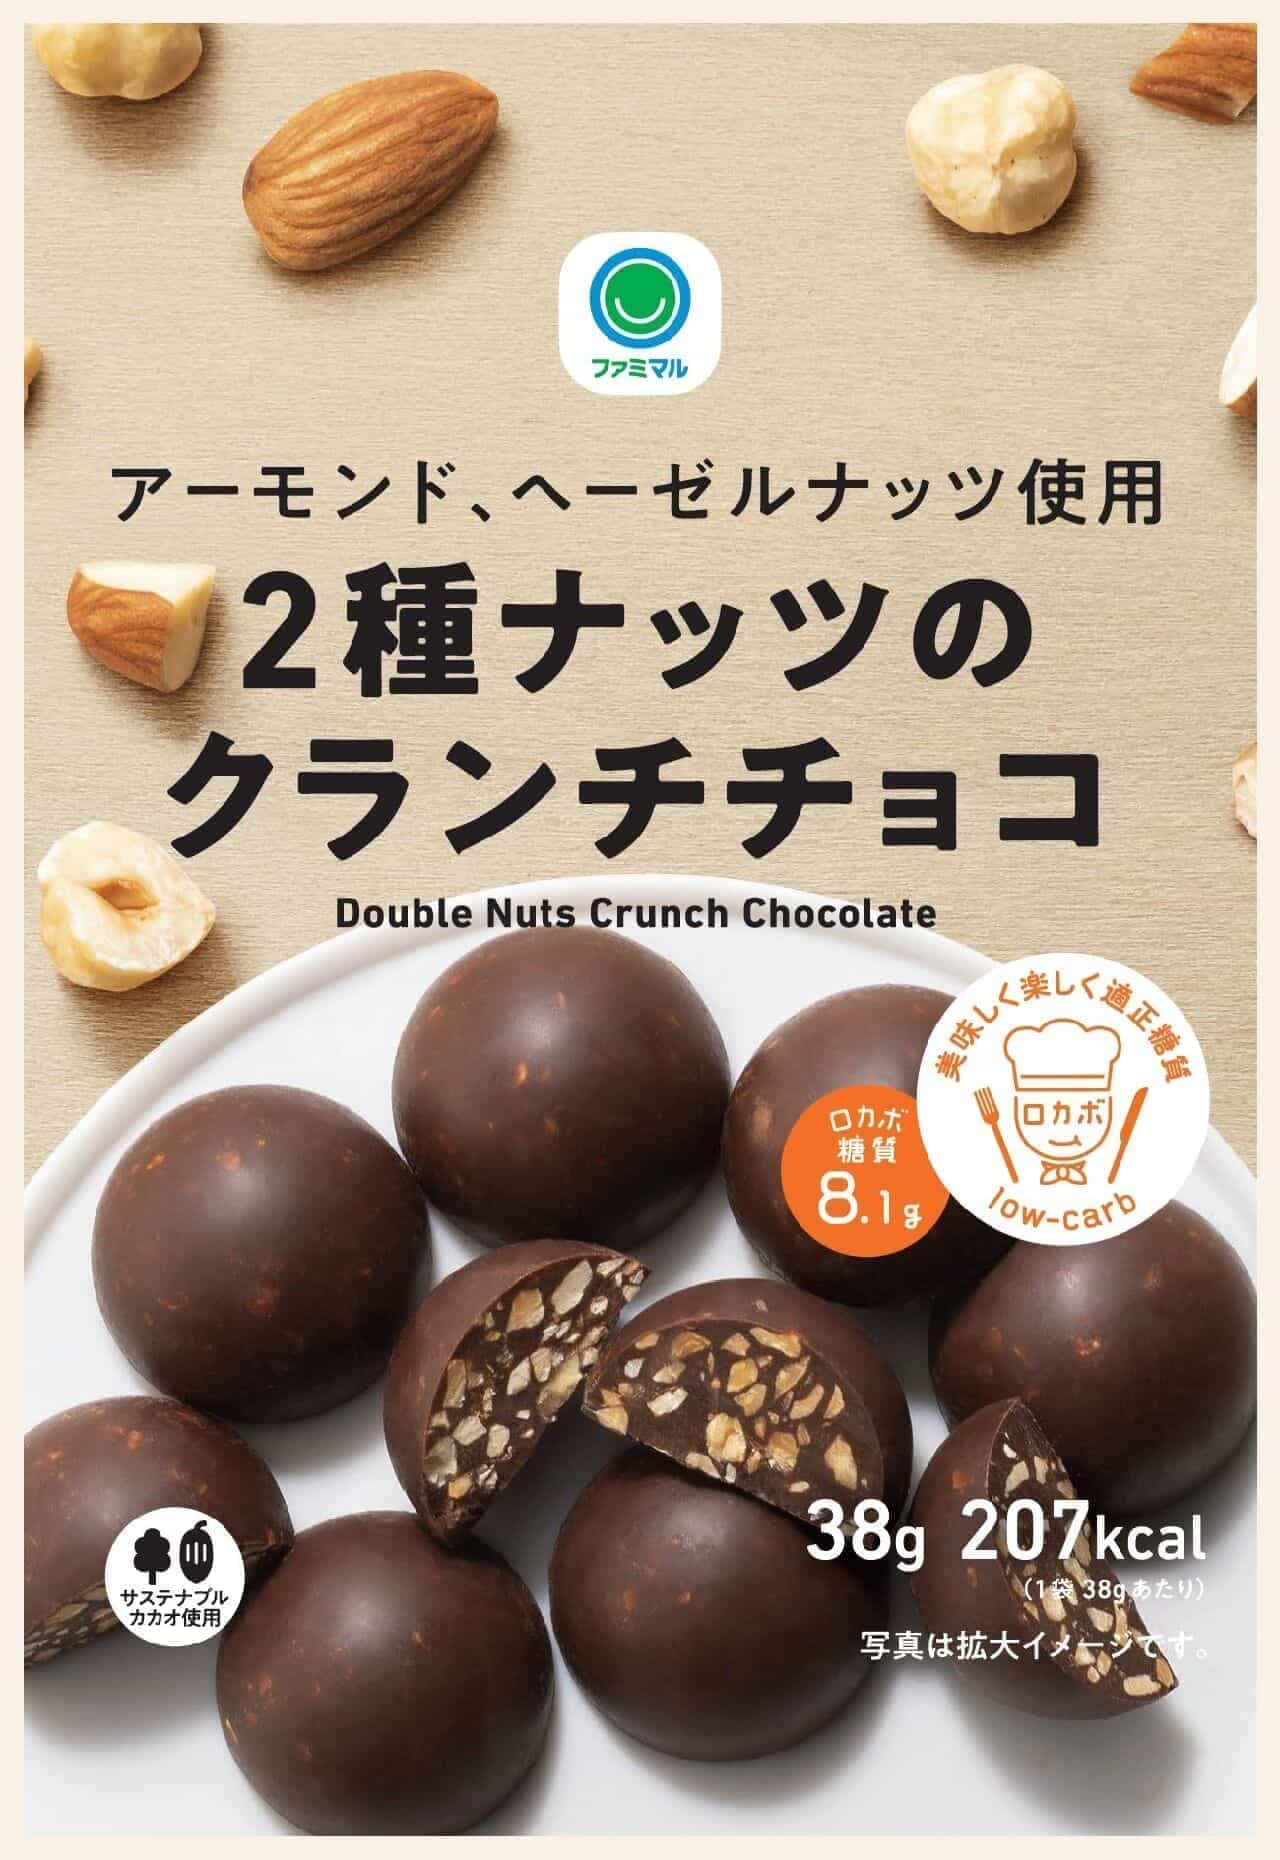 FamilyMart "Two kinds of nuts crunch chocolate"